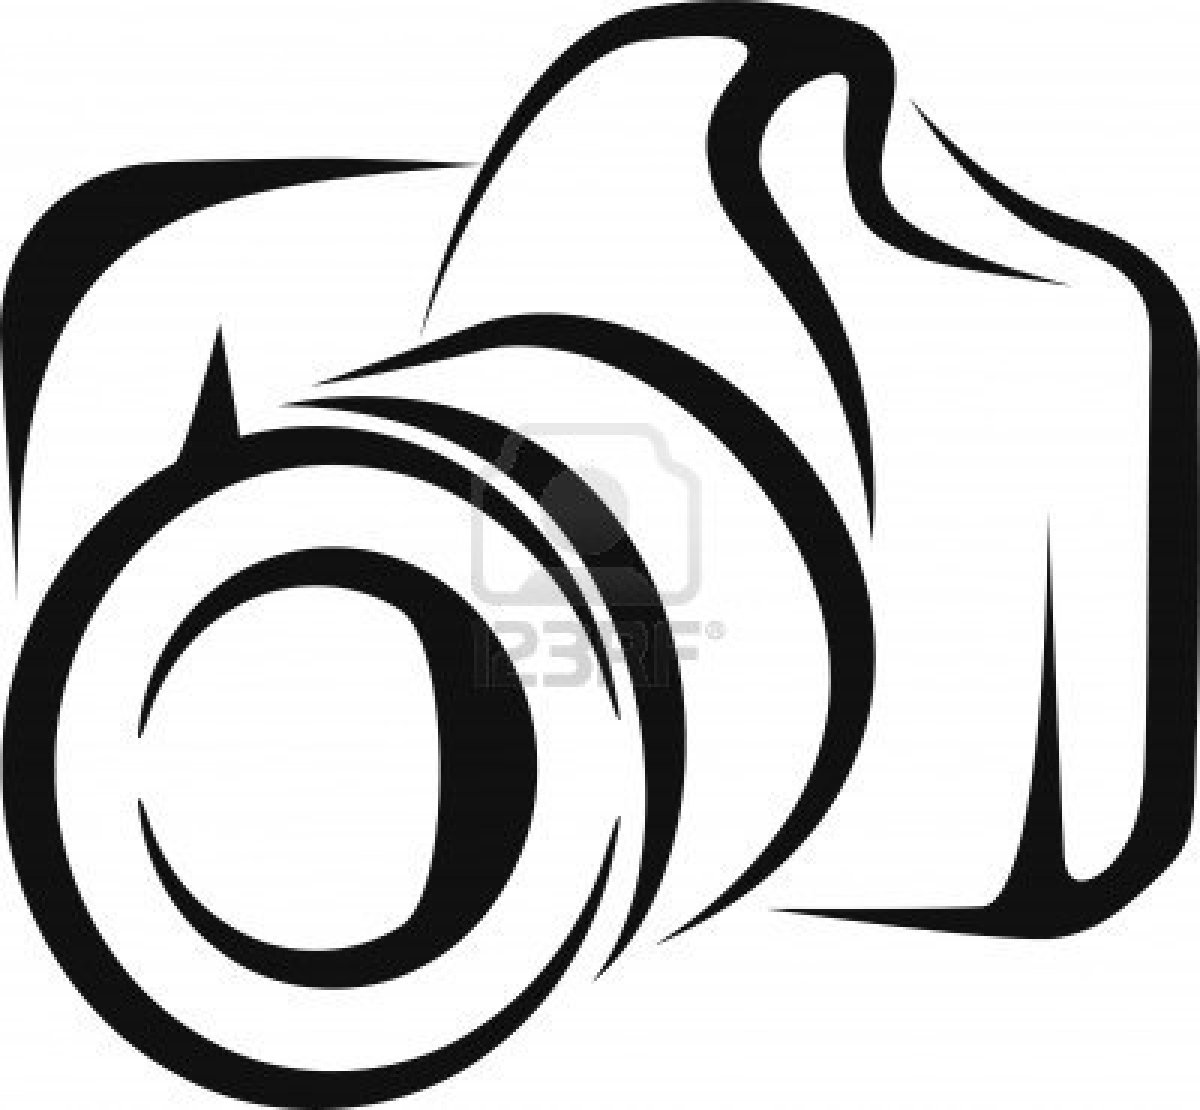 Clipart of camera black and w